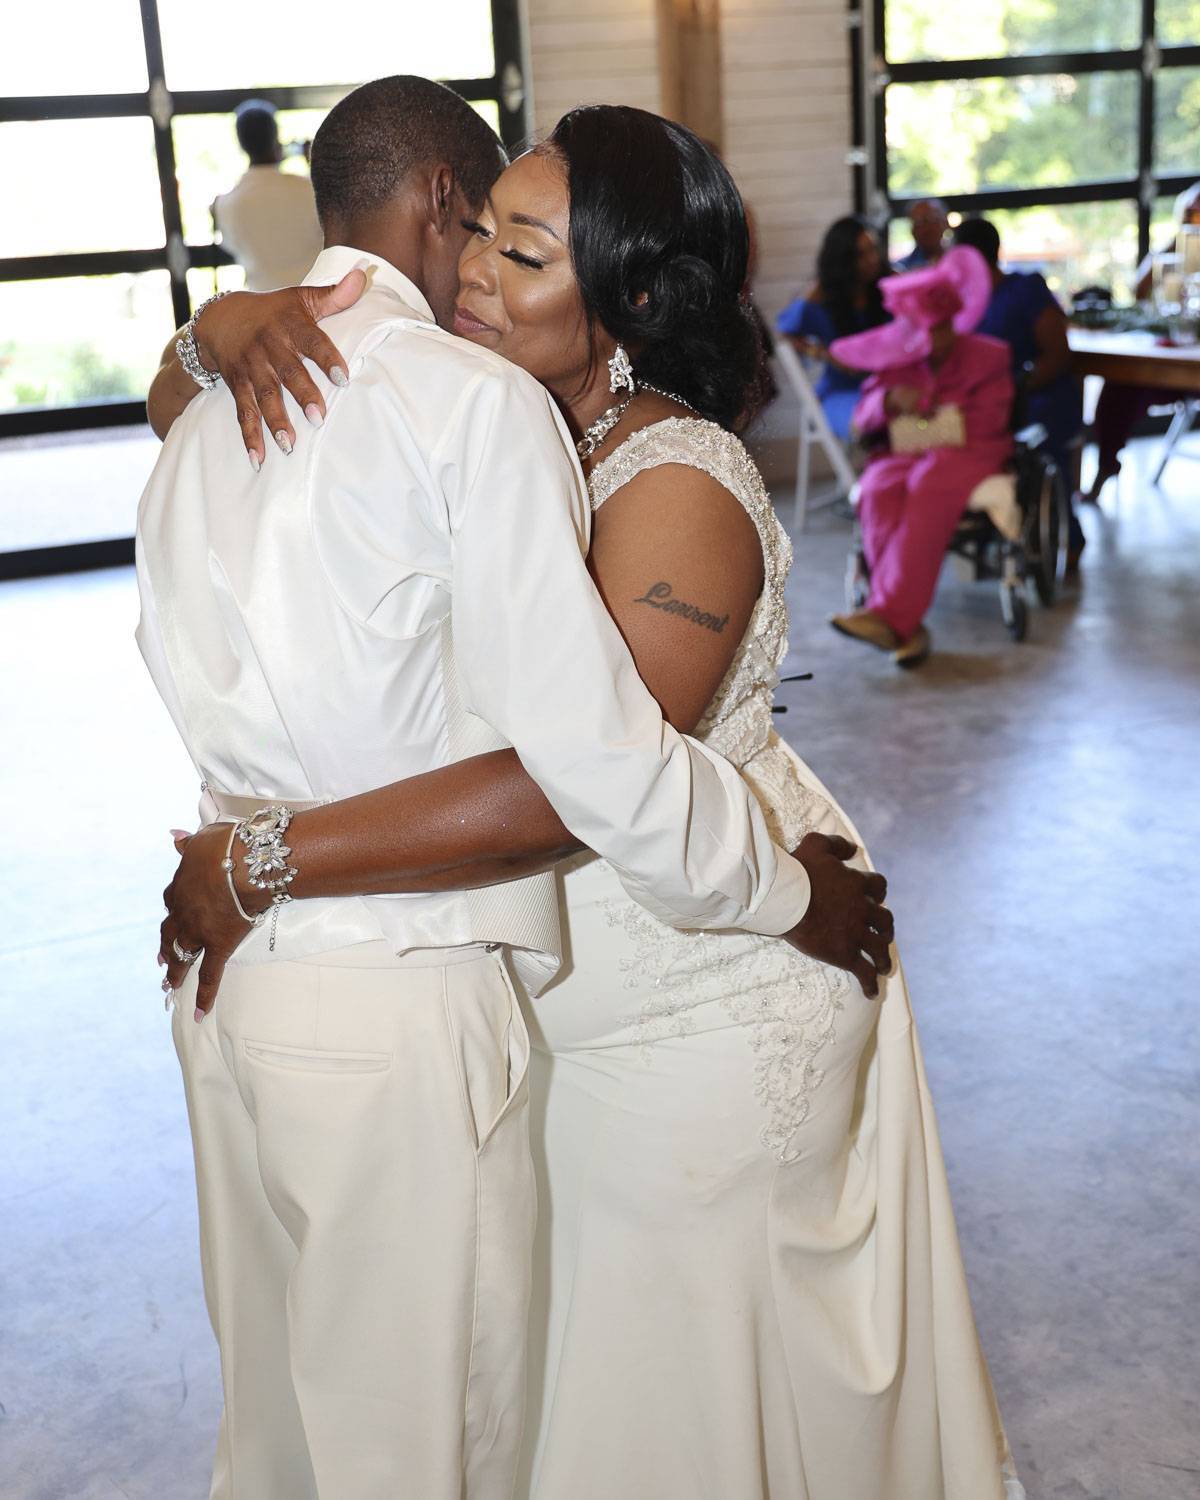 The bride and groom in an embrace